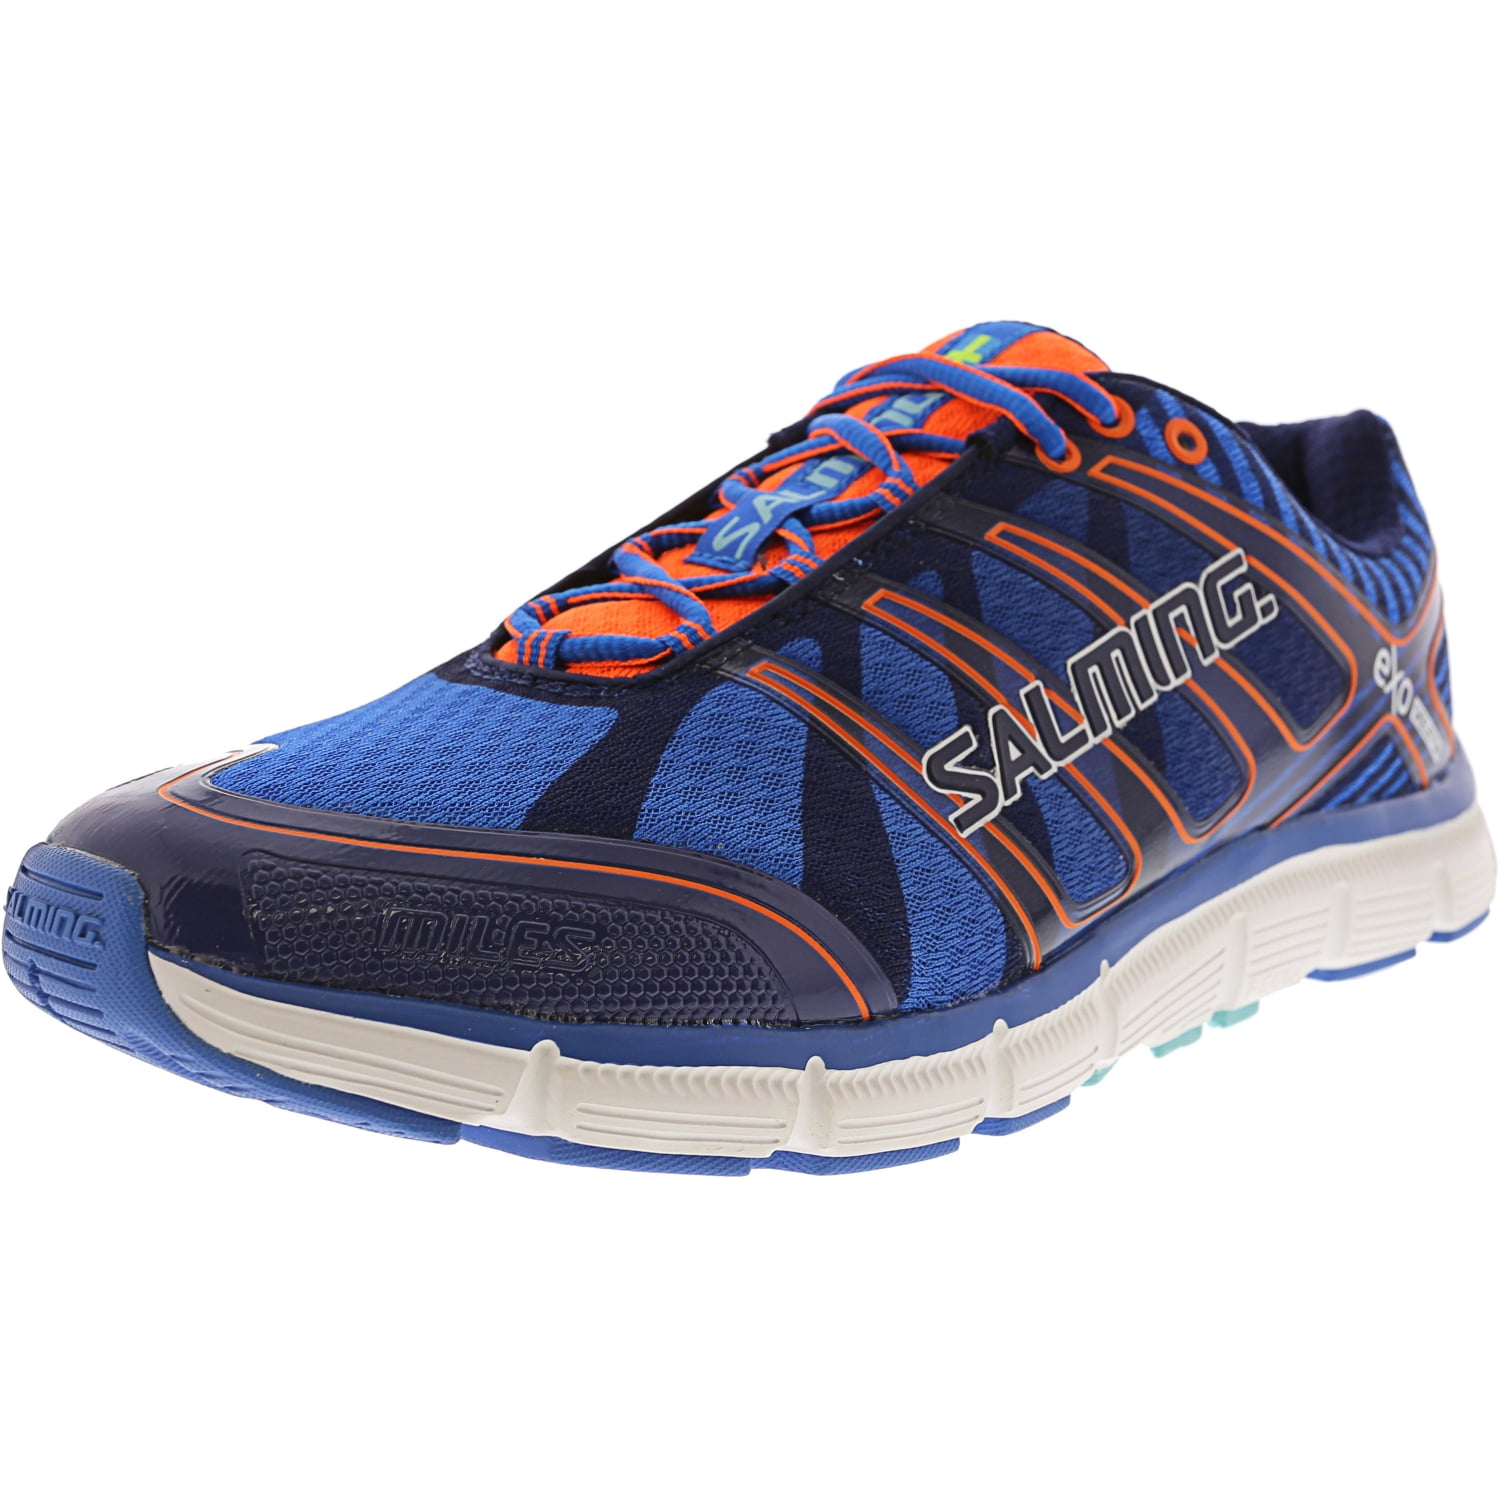 Blue Salming Elements Mens Trail Running Shoes 